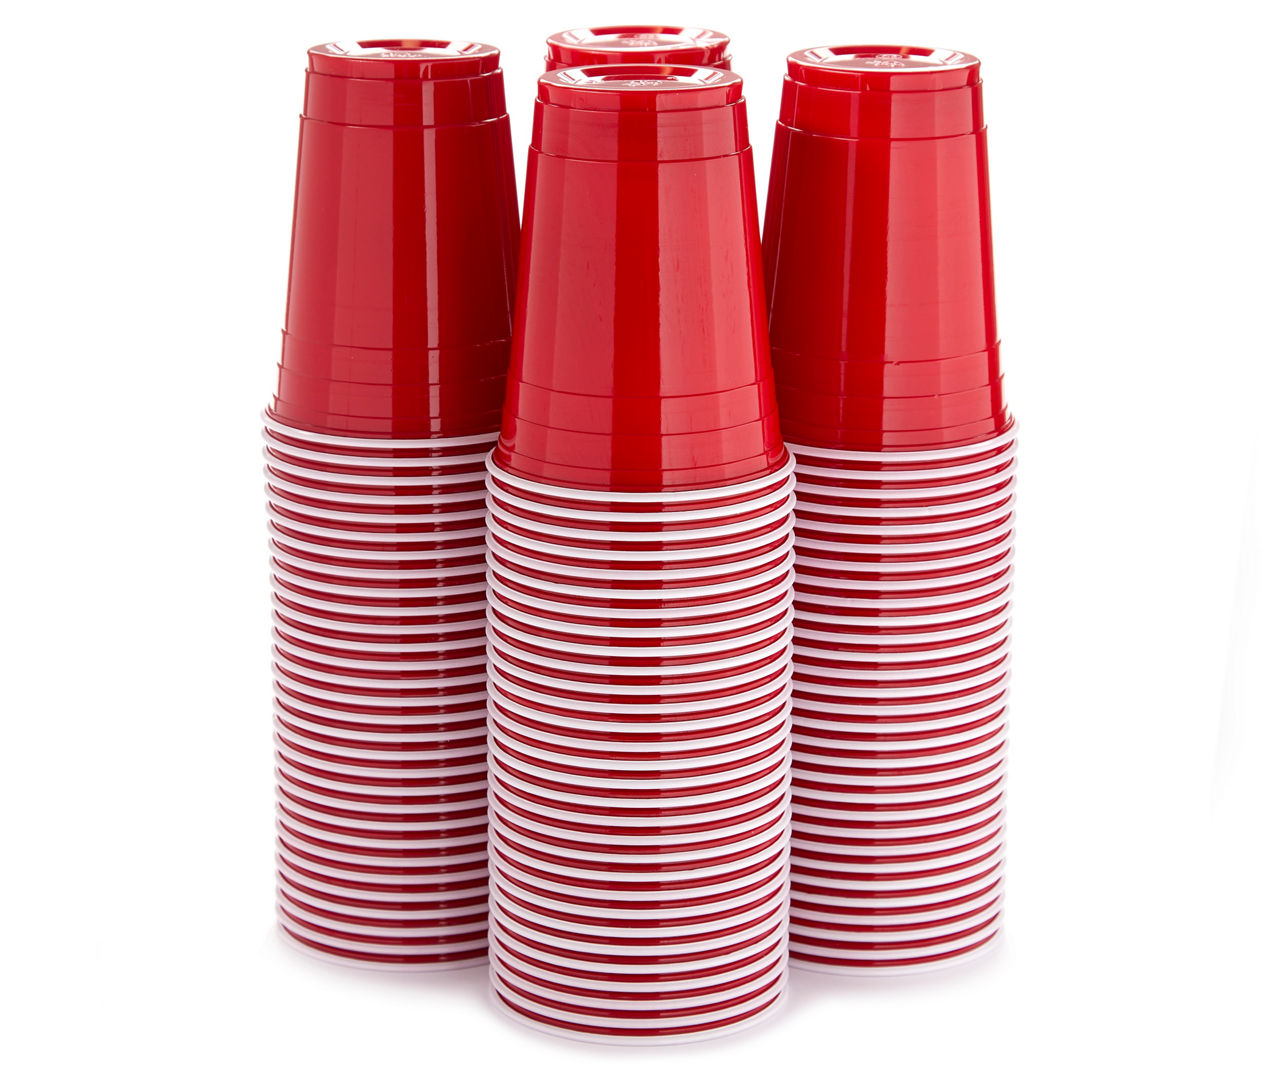 Big Lots Red Plastic 18 Oz. Everyday Party Cups, 120-Count